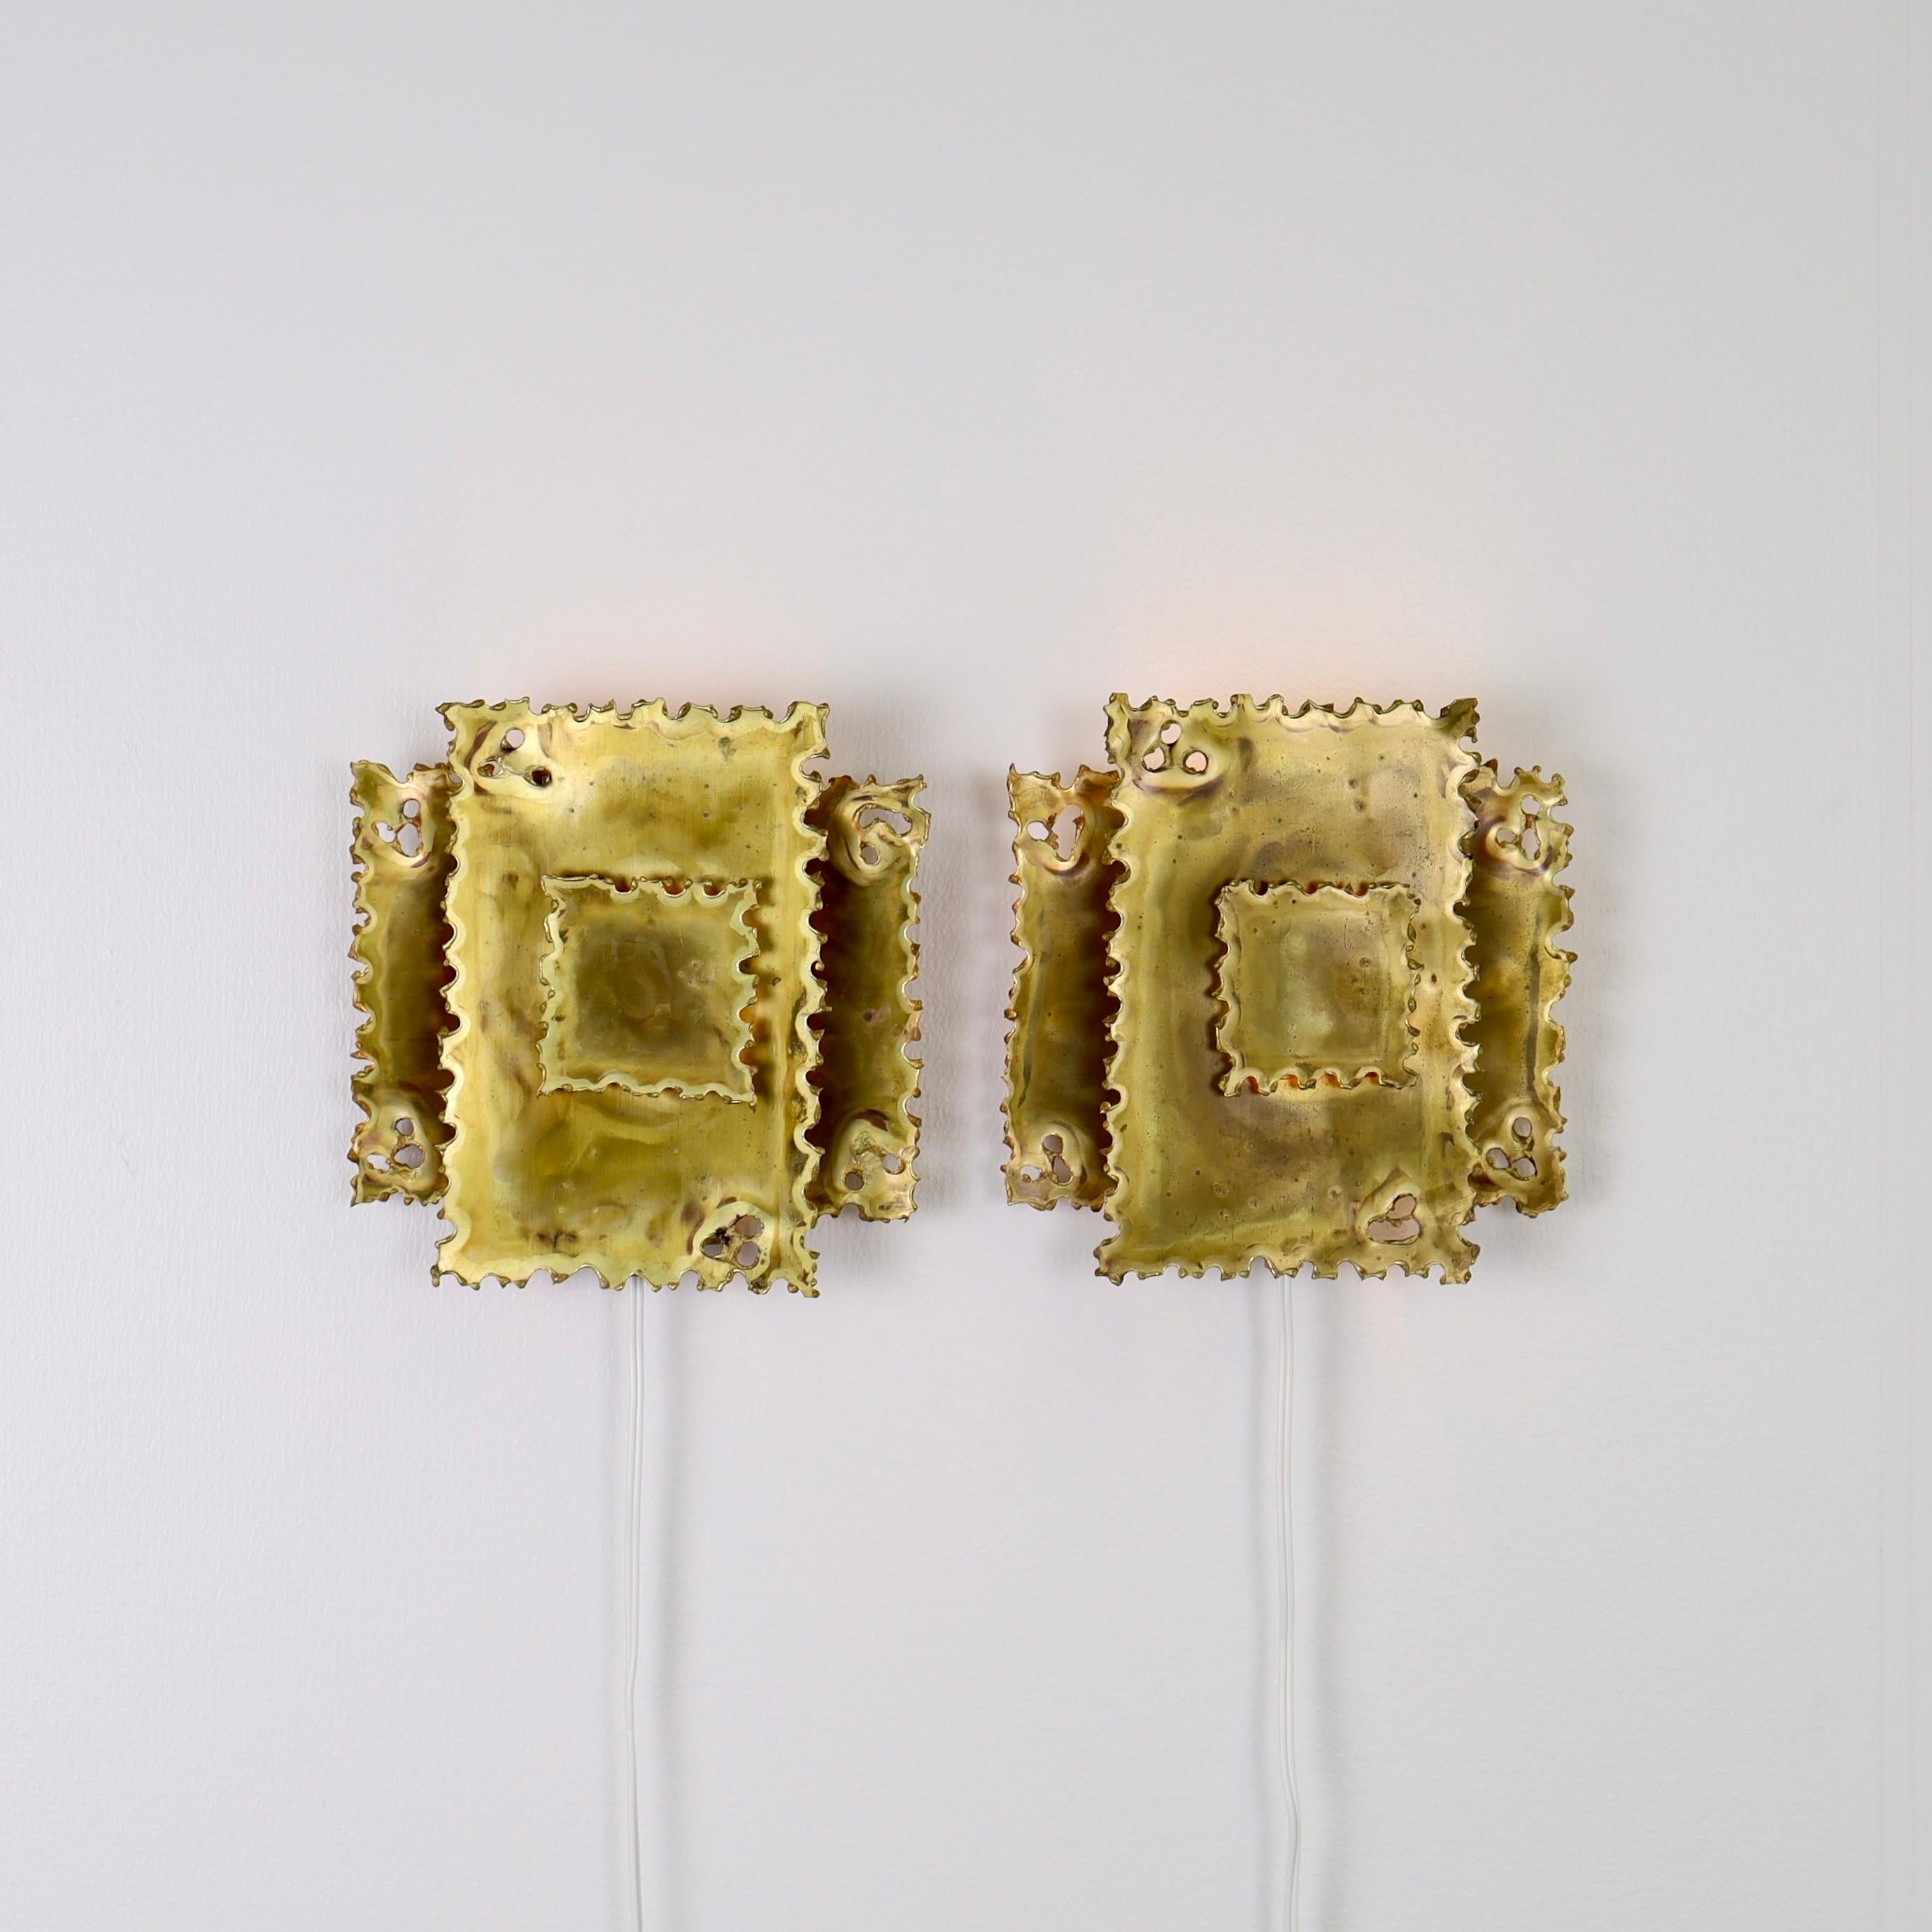 Pair of Square Brass Wall Lamps by Svend Aage Holm Sorensen, 1960s, Denmark For Sale 4